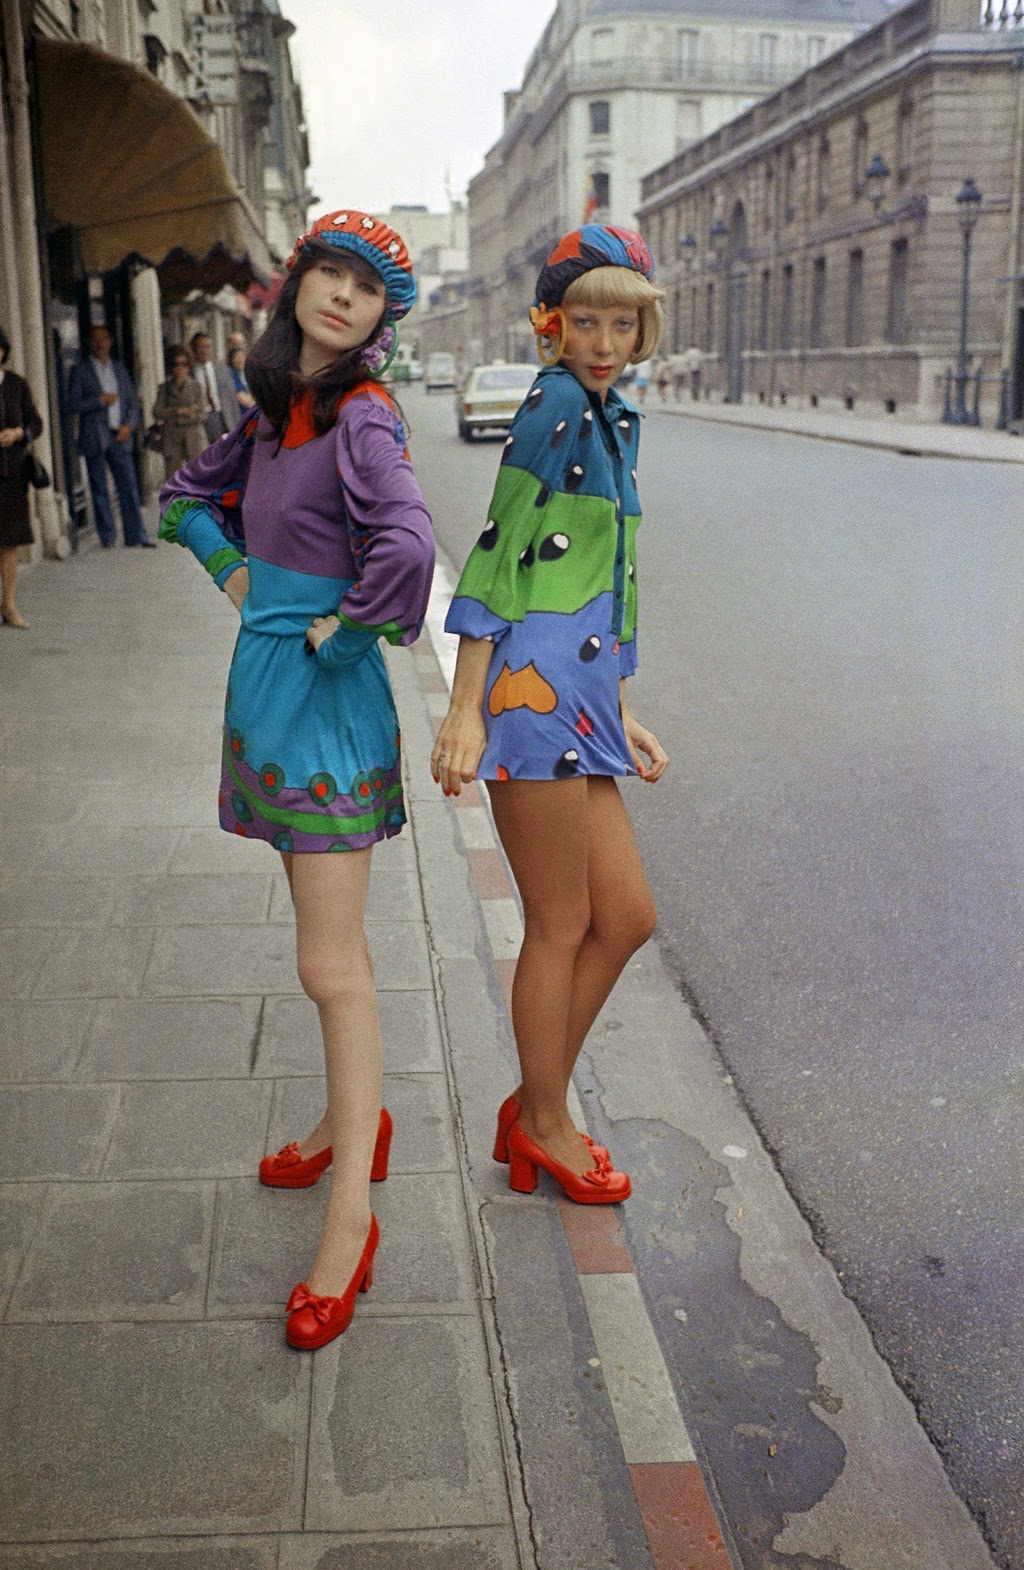 20 photos show the beautiful of the 1970s fashion